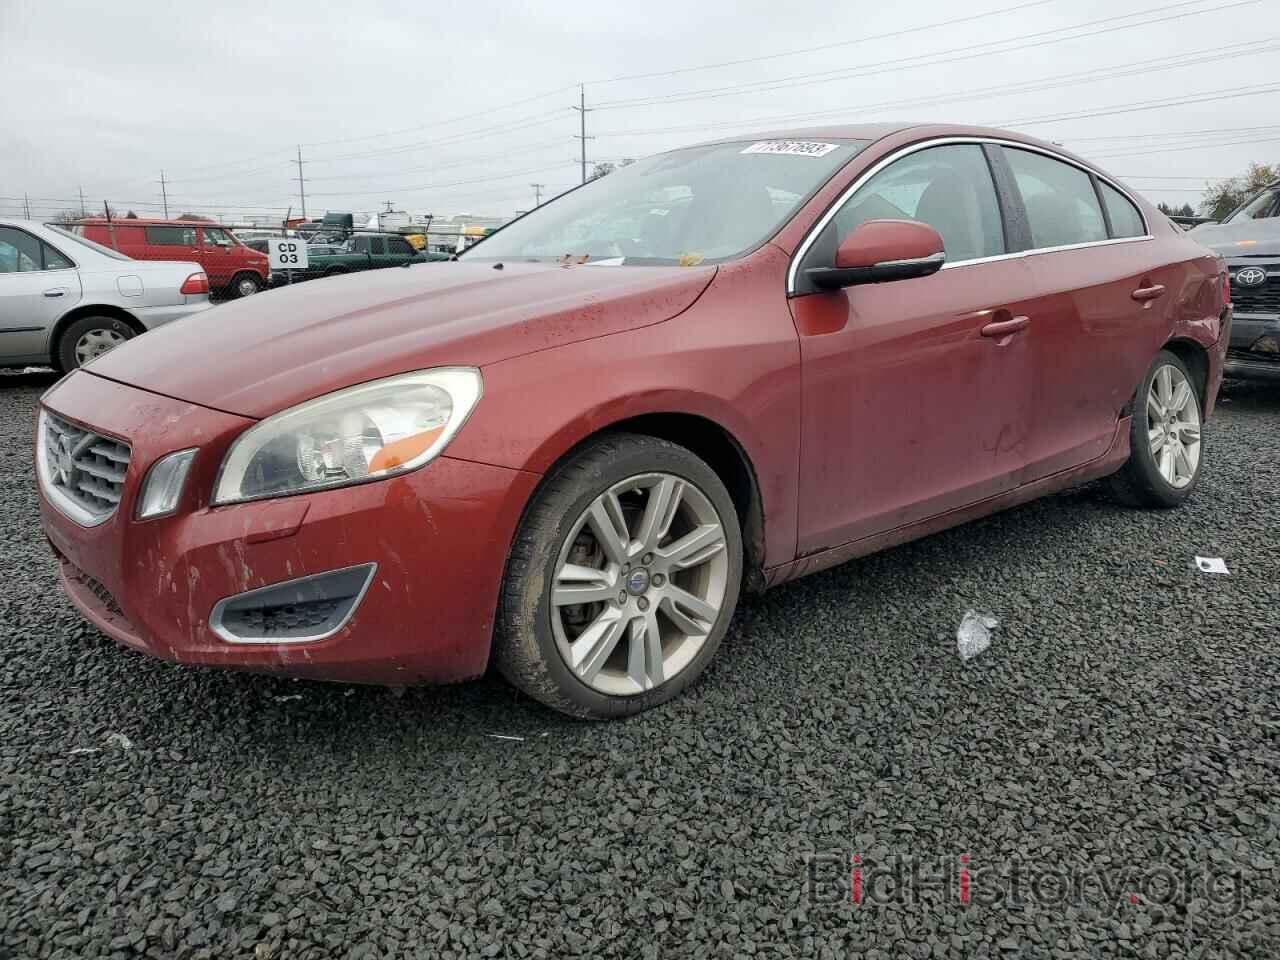 Report YV1612FS3D2187315 VOLVO S60 2013 BURGUNDY GAS - price and damage ...